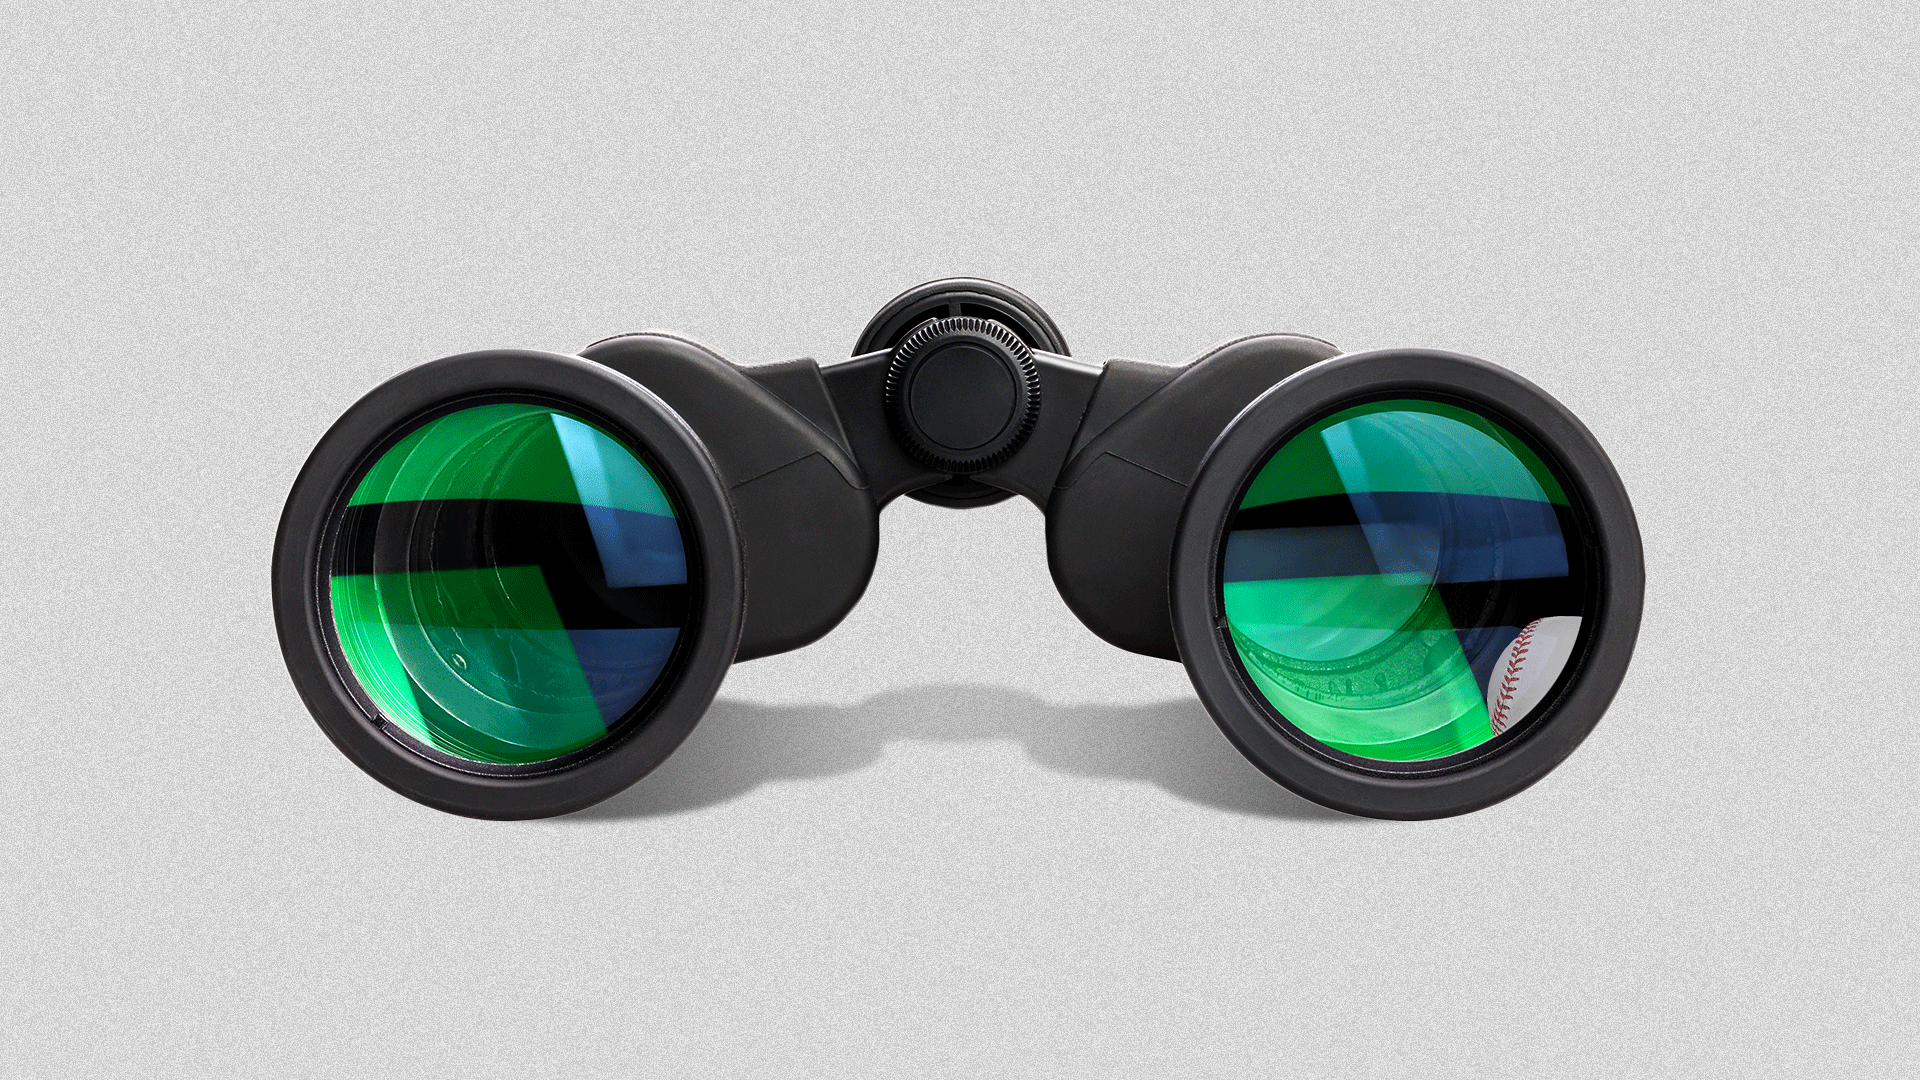 Animated illustration of a pair of binoculars with a reflection of a baseball being thrown in the lenses.